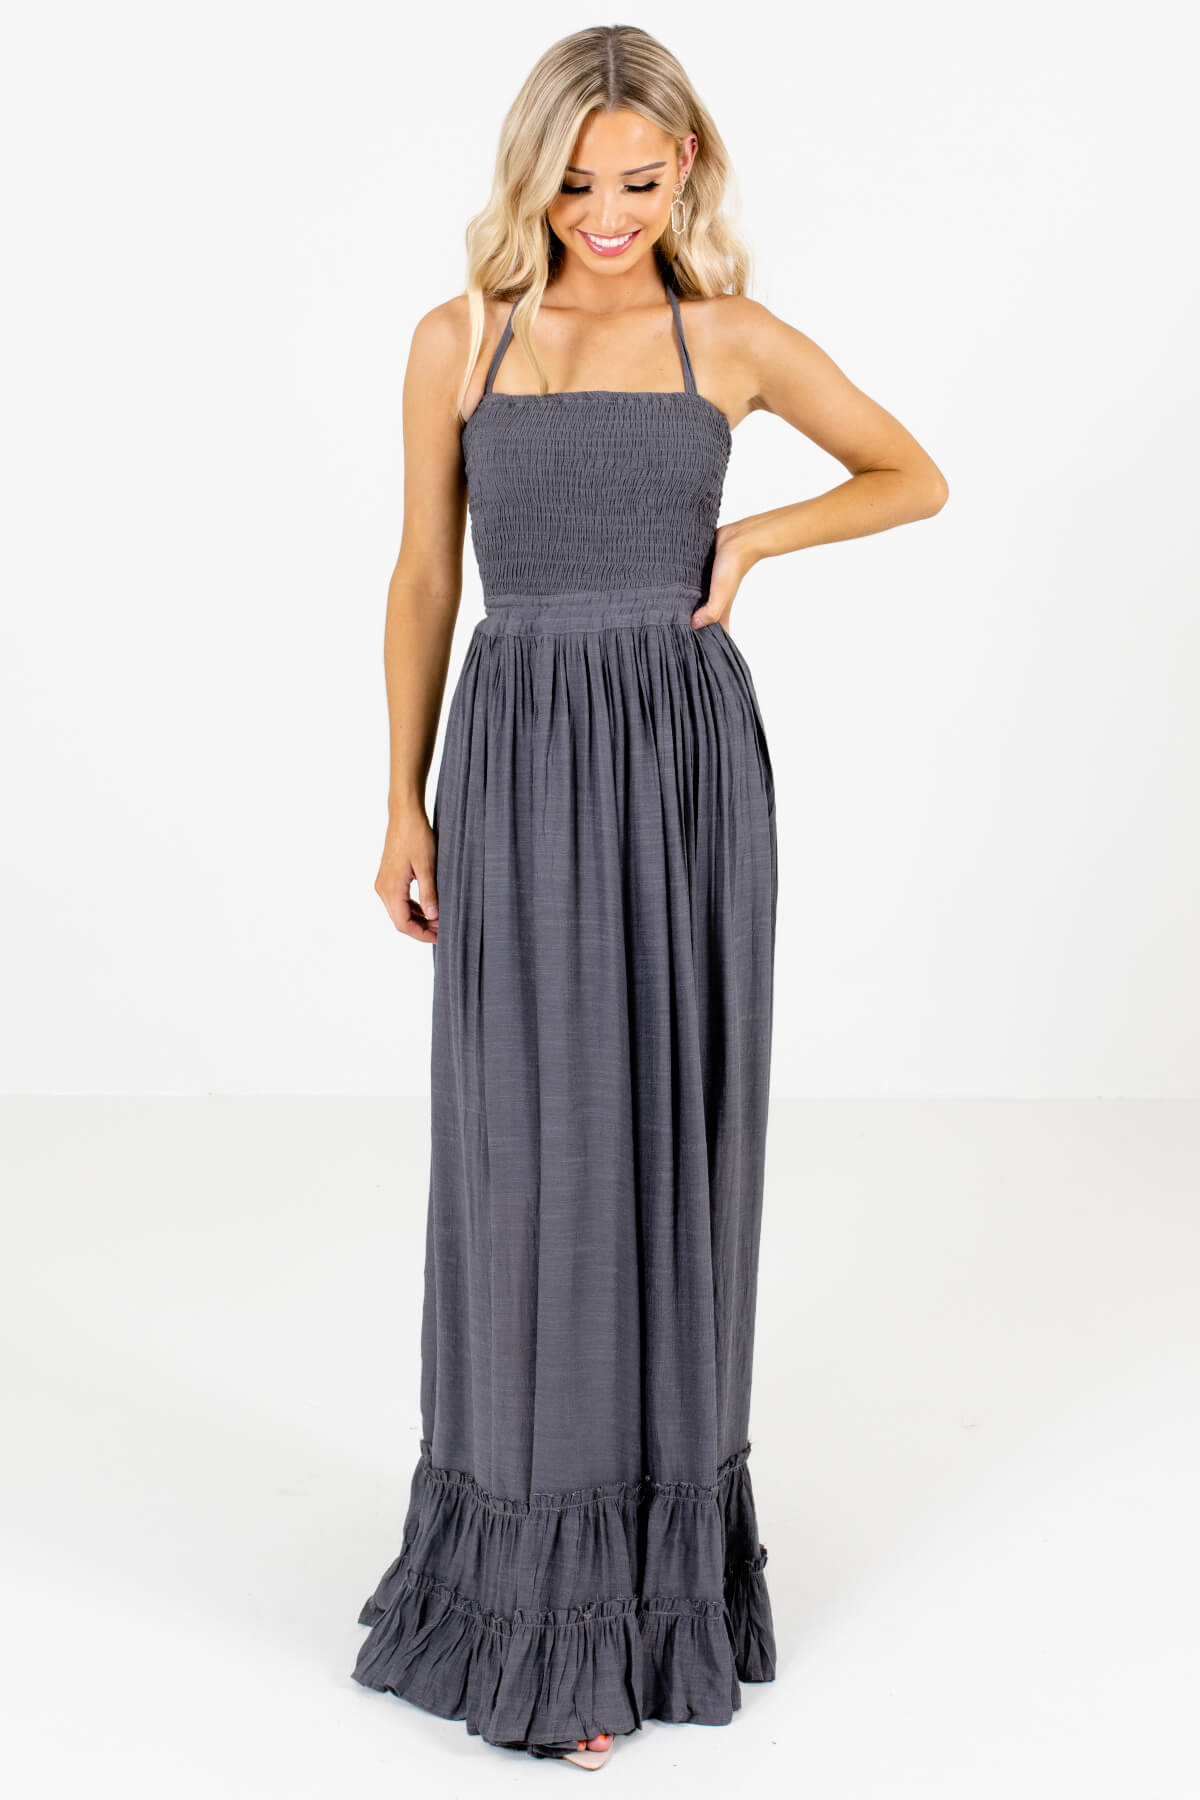 Women's Charcoal Gray Partially Lined Boutique Maxi Dress